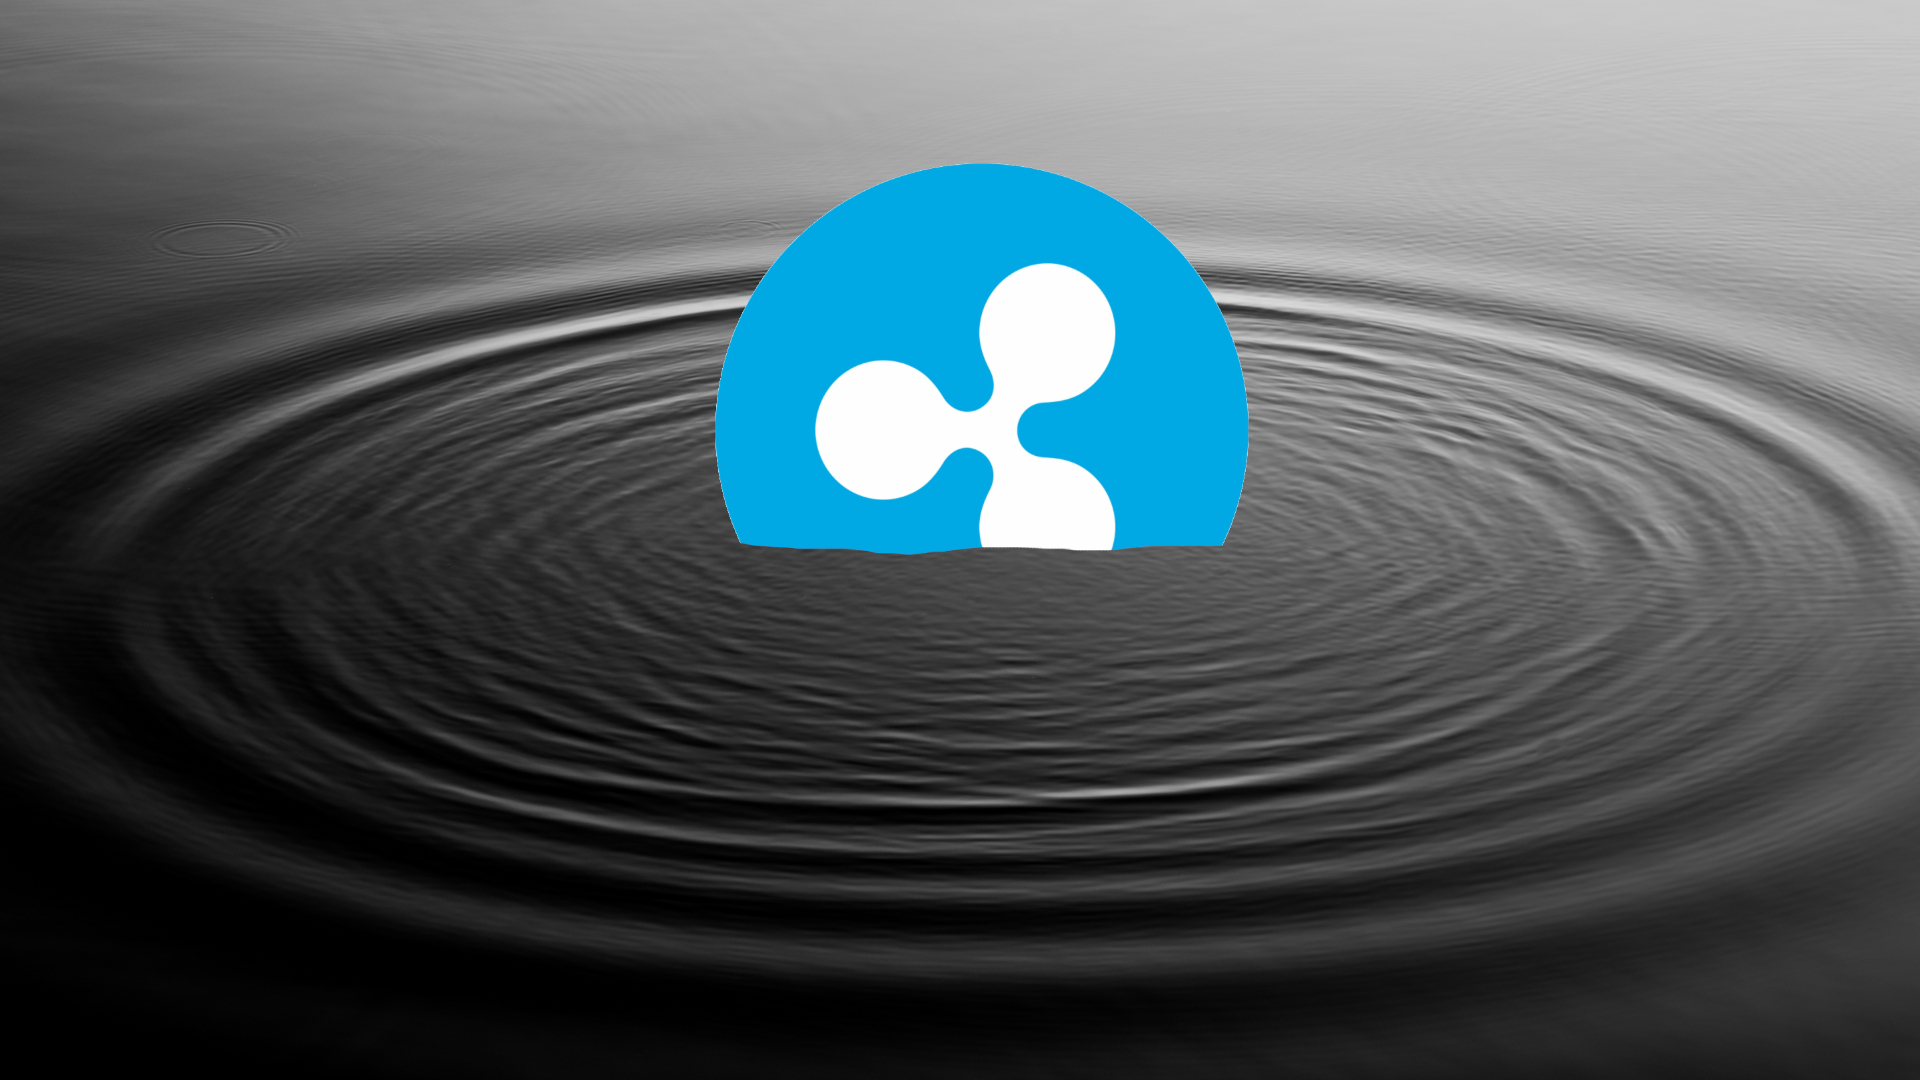 Twitter coinbase ripple squid game scam crypto